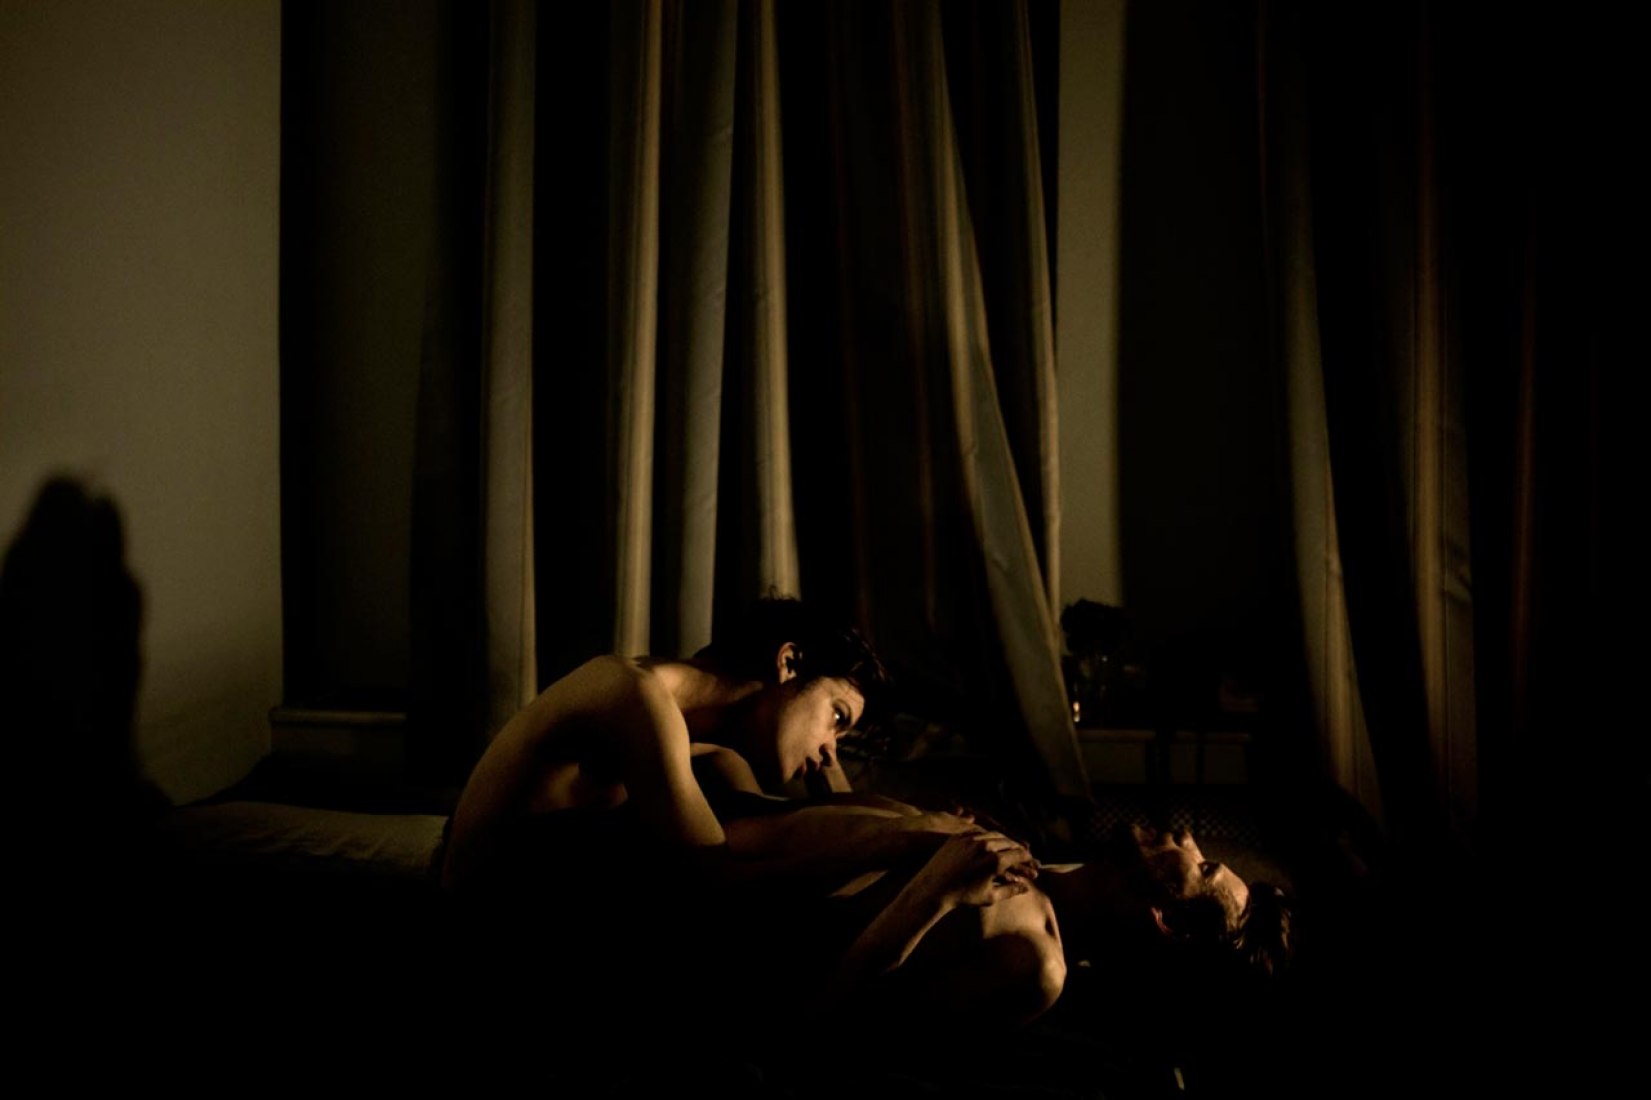 Jon and Alex Mads. Nissen World Press Photo of the Year. Contemporary Issues 2015. 1st prize singles. Jon, 21, and Alex, 25 are a couple. Being lesbian, gay, bisexual or transgender (LGBT) is becoming more and more difficult in Russia.